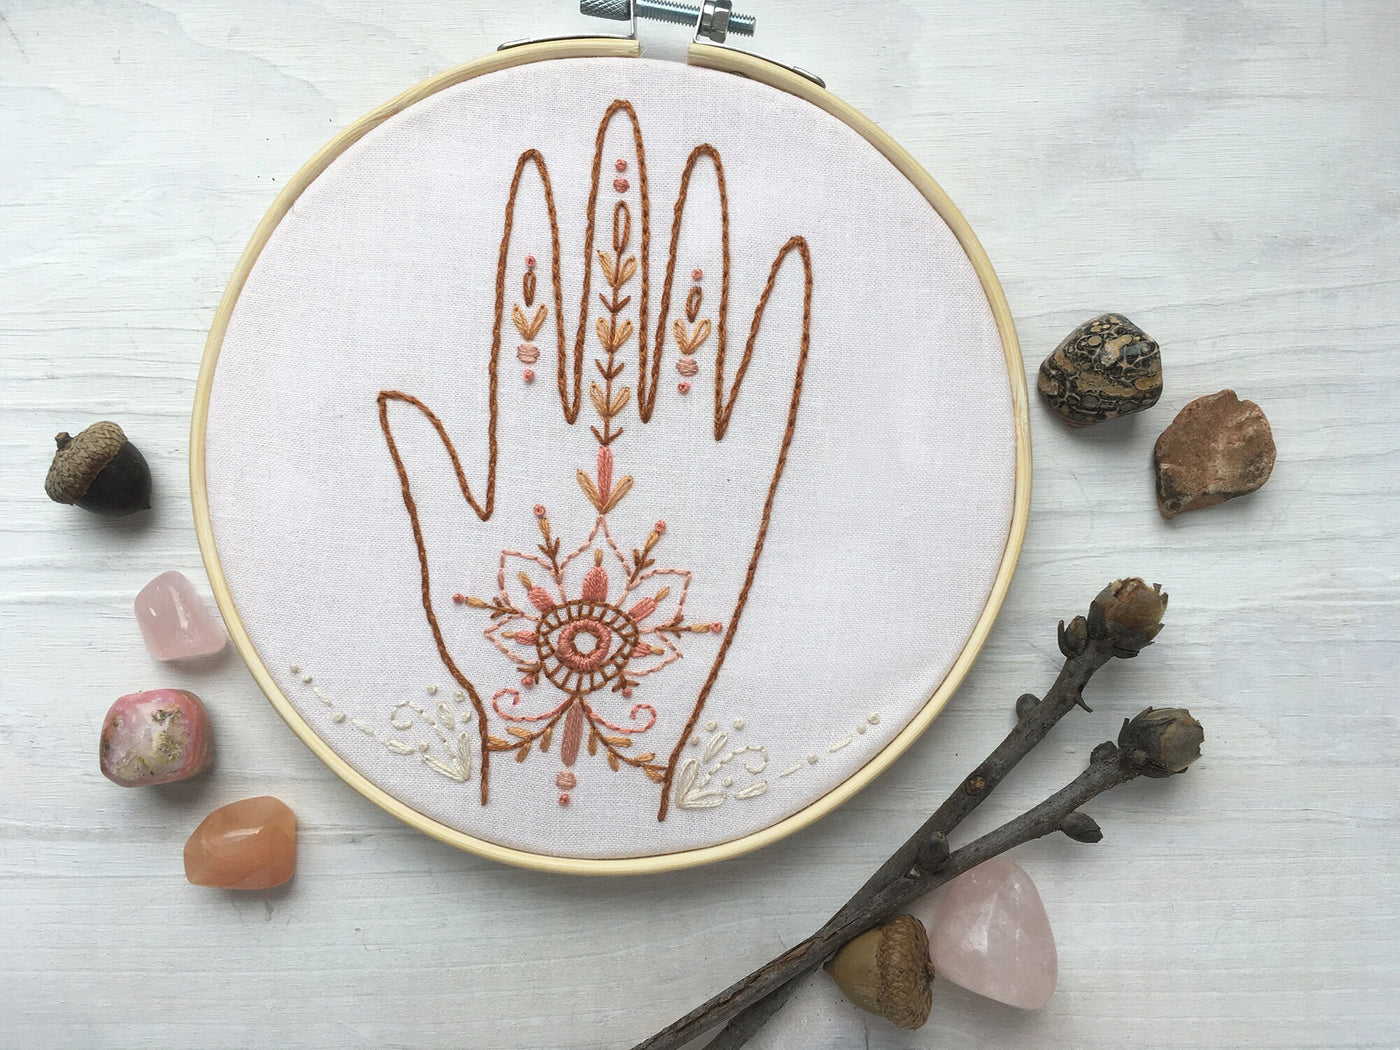 Hand Embroidery pattern download